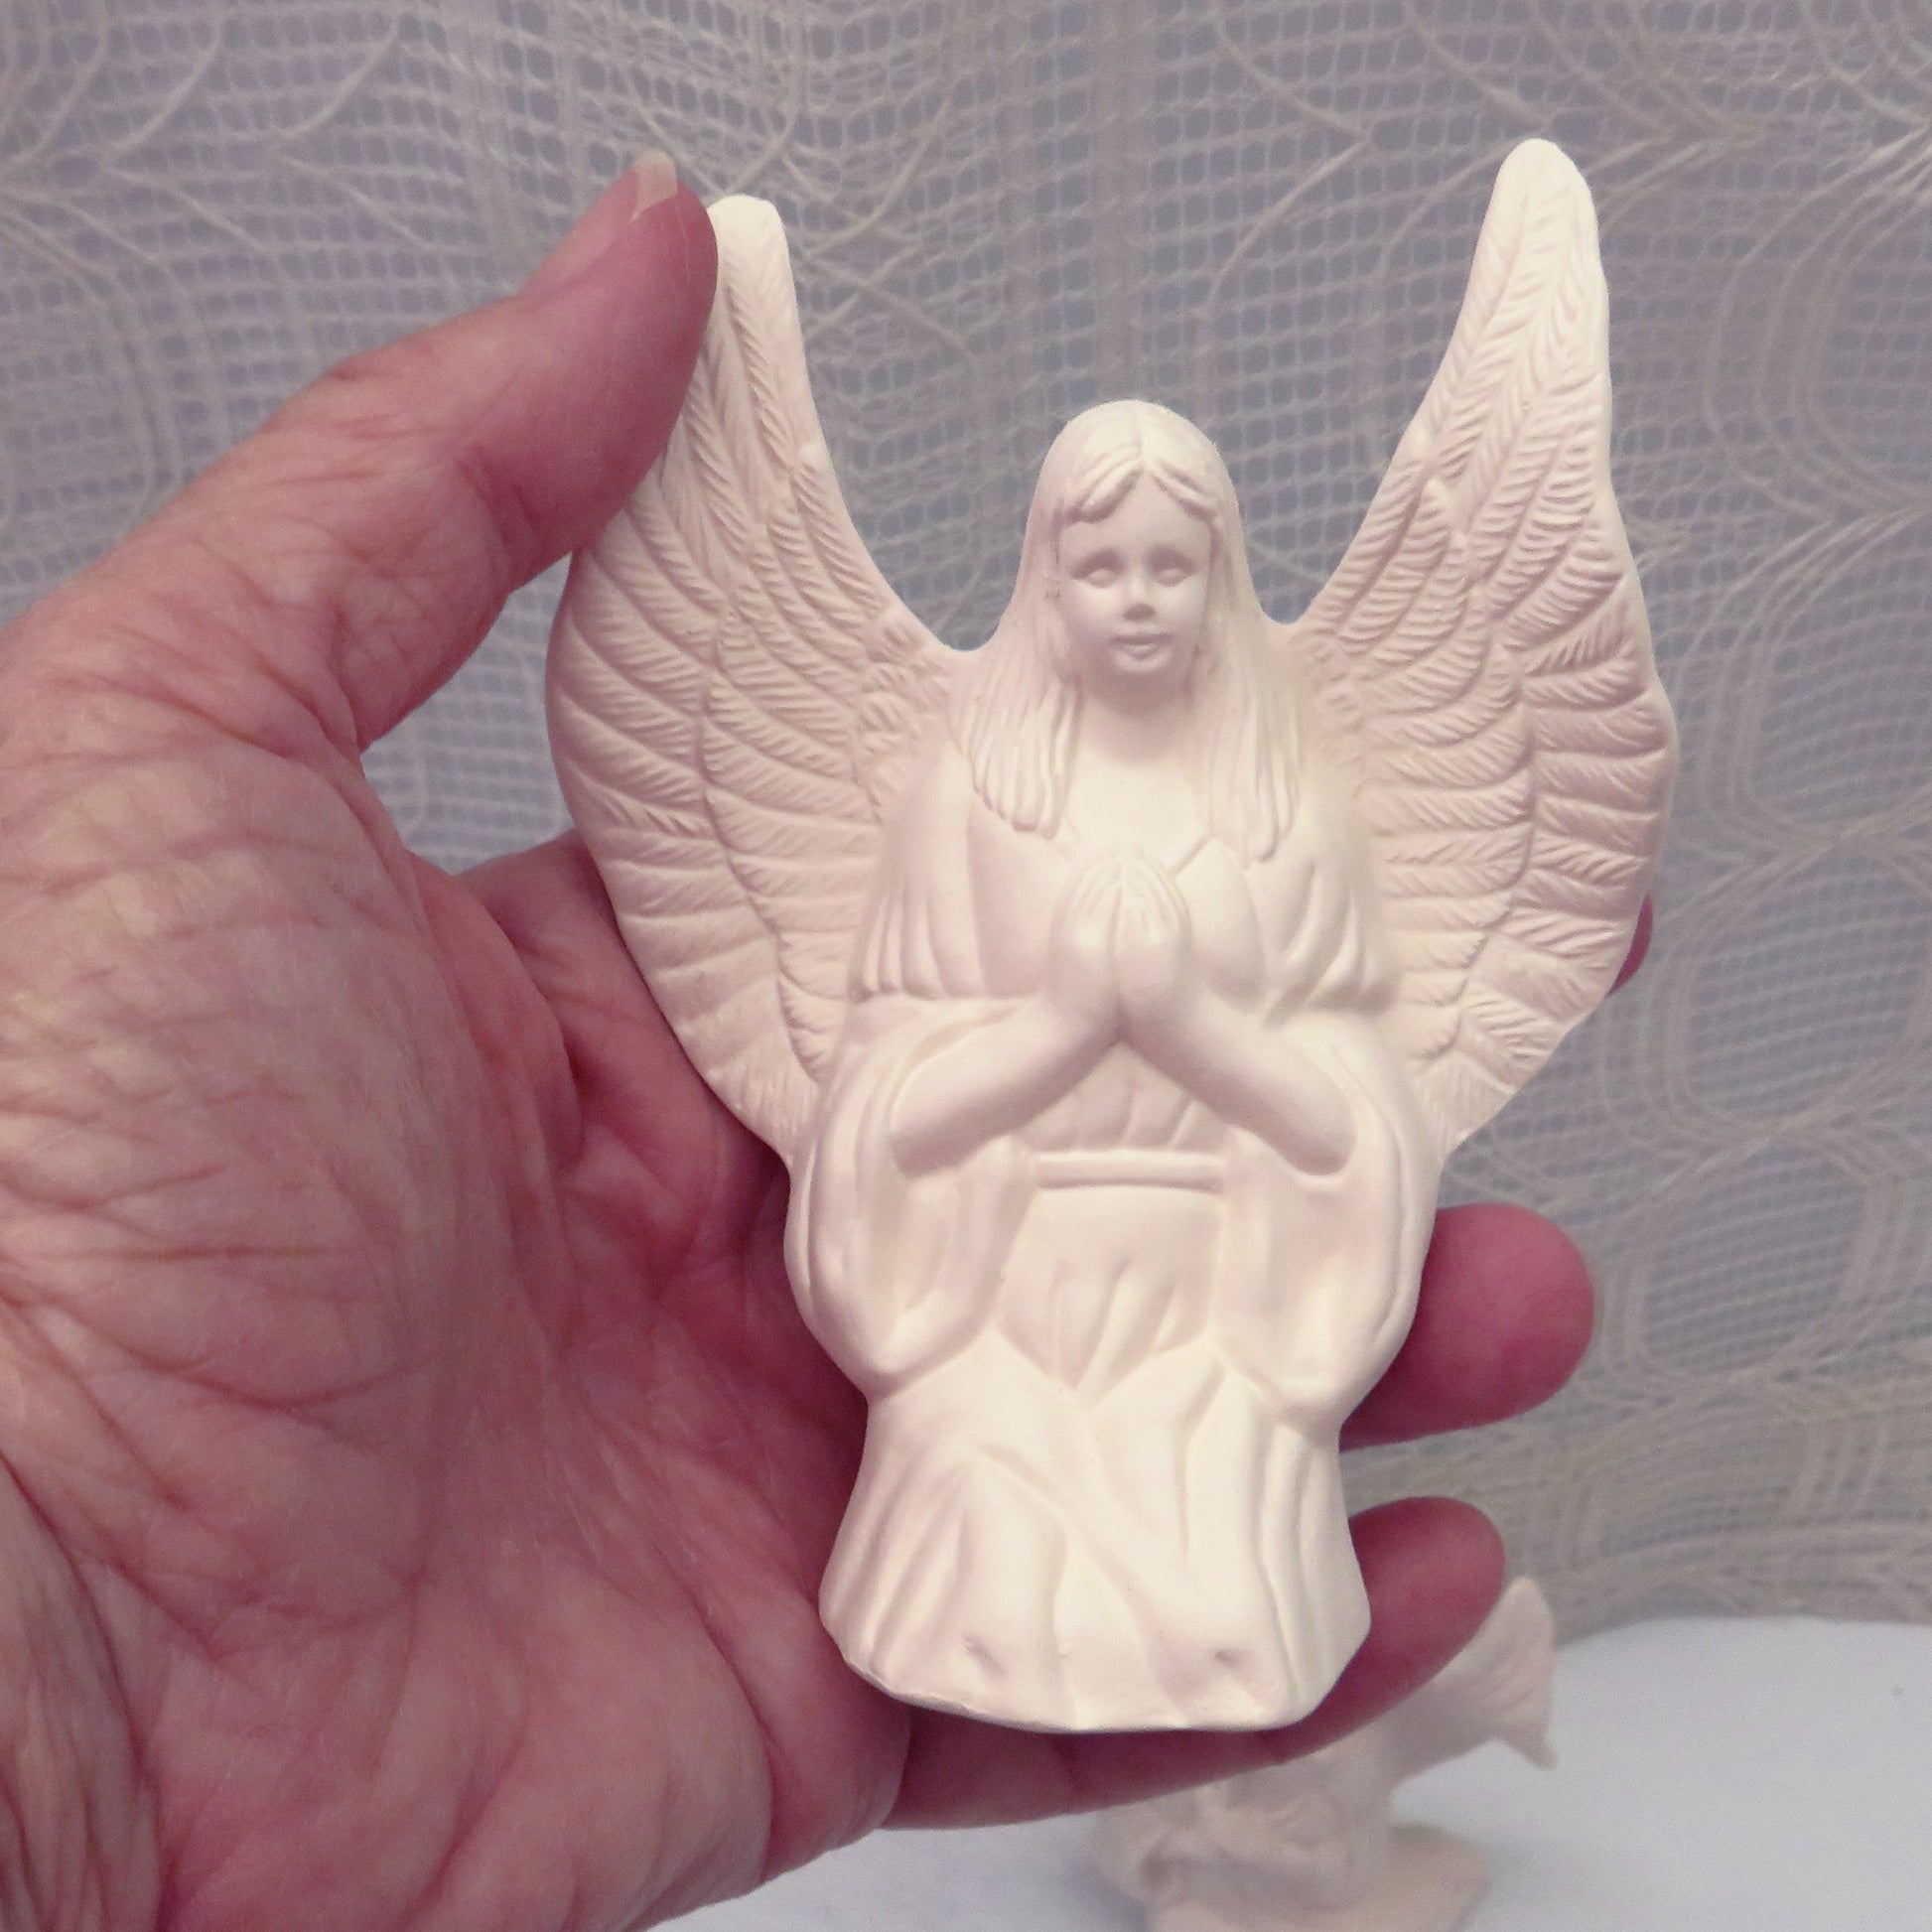 handmade ready to paint ceramic angel figurine in kneeling position with hands in prayer position.